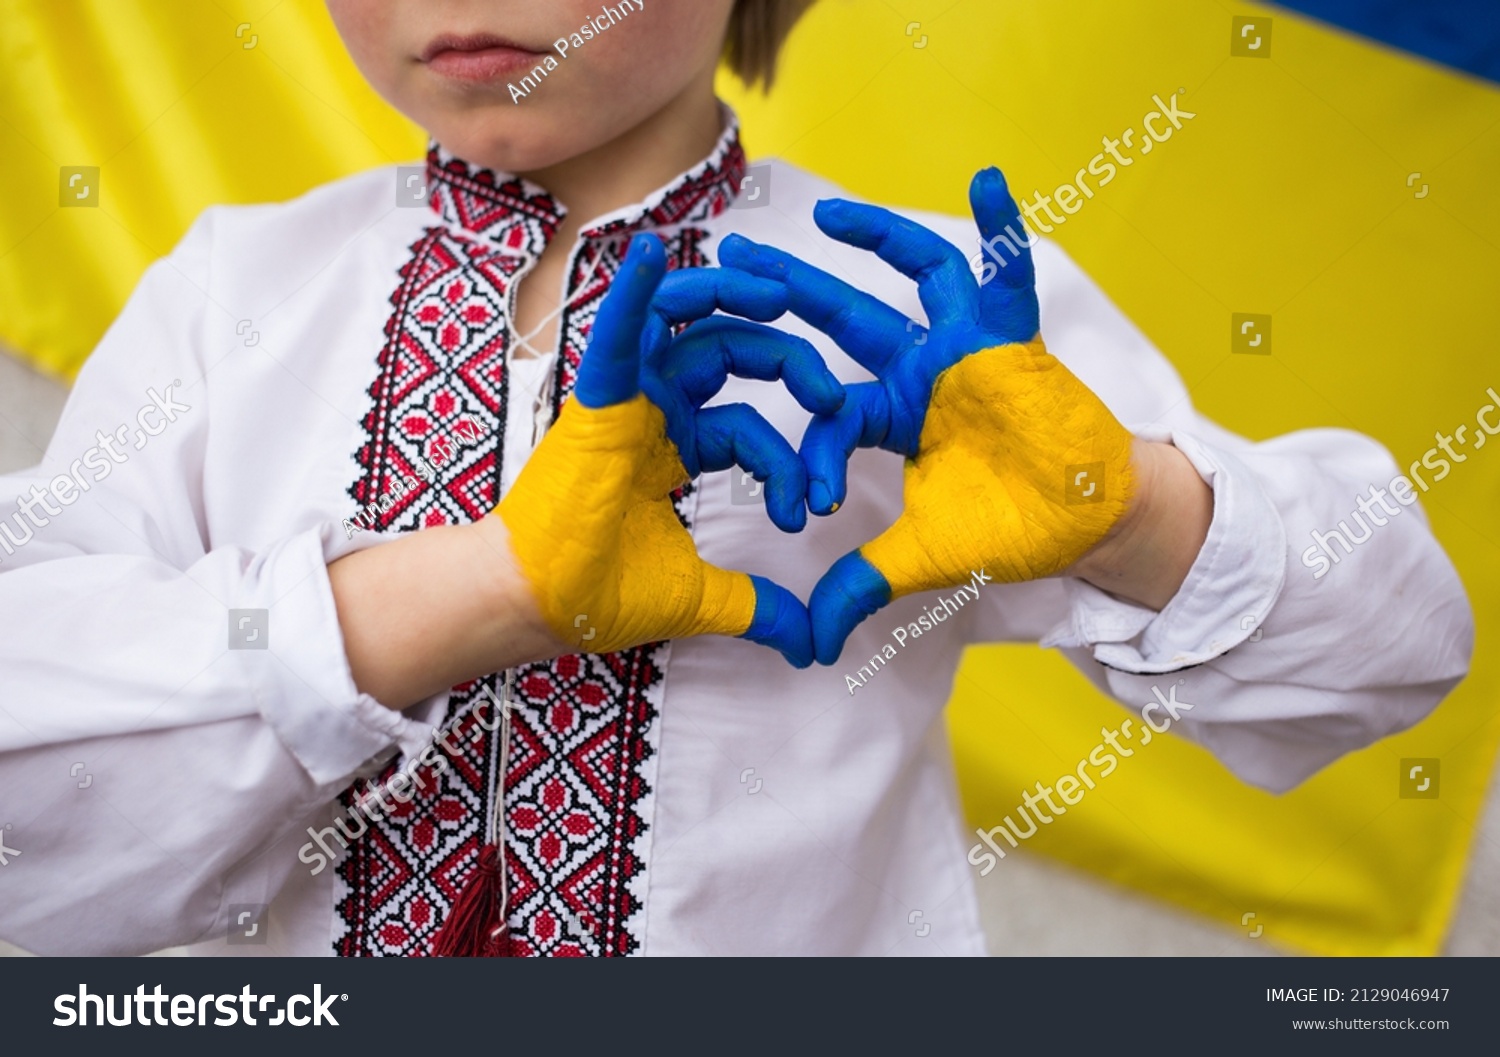 Children against war. Russia's invasion of Ukraine, request for help from world community. child against background of Ukrainian flag with hands in shape of a heart, painted in yellow and blue #2129046947